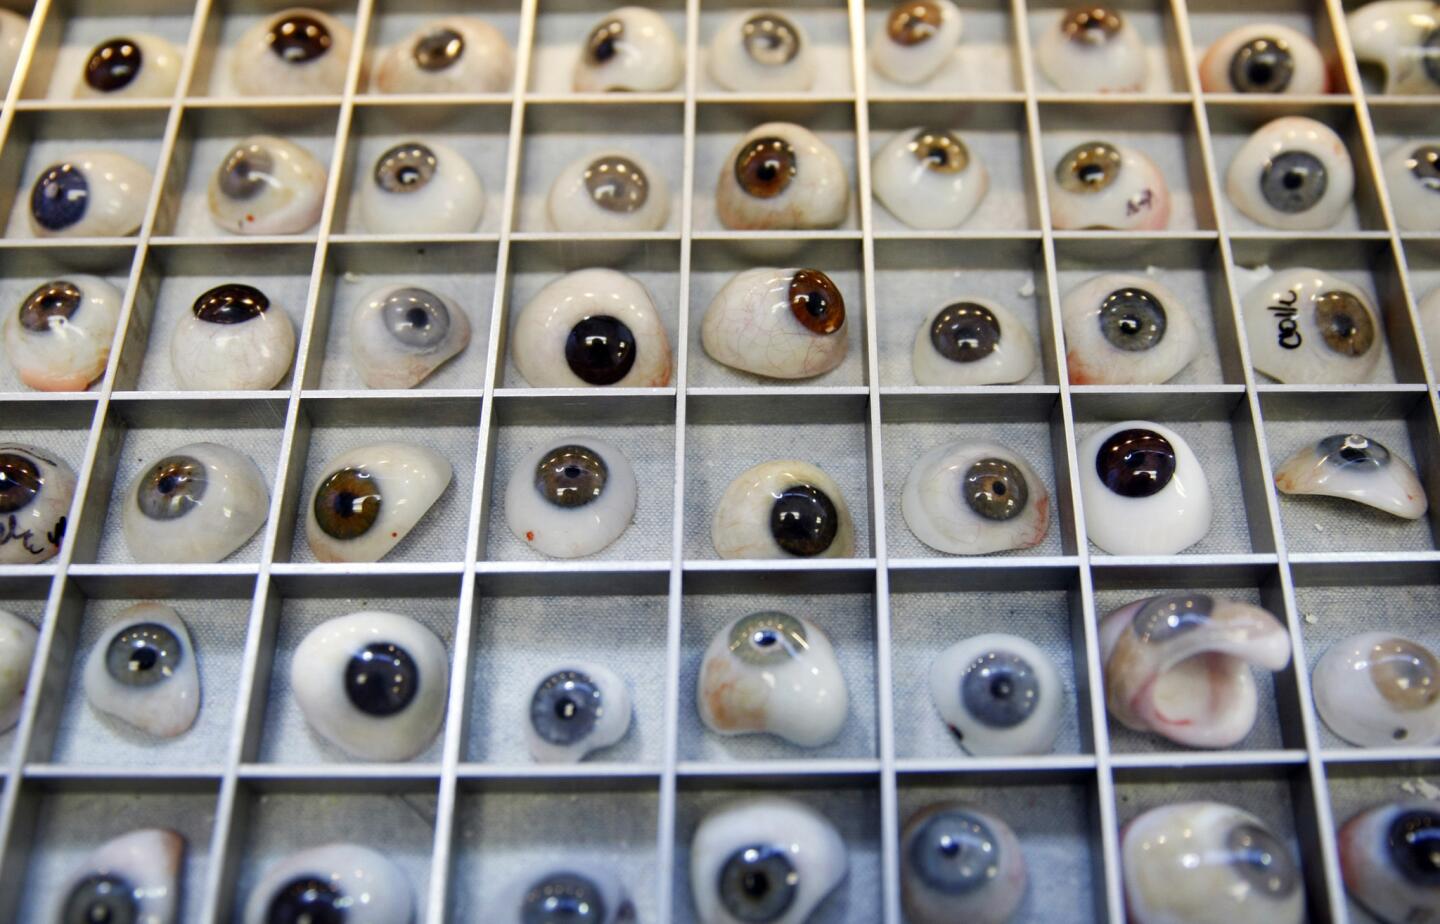 Inventory of eyes